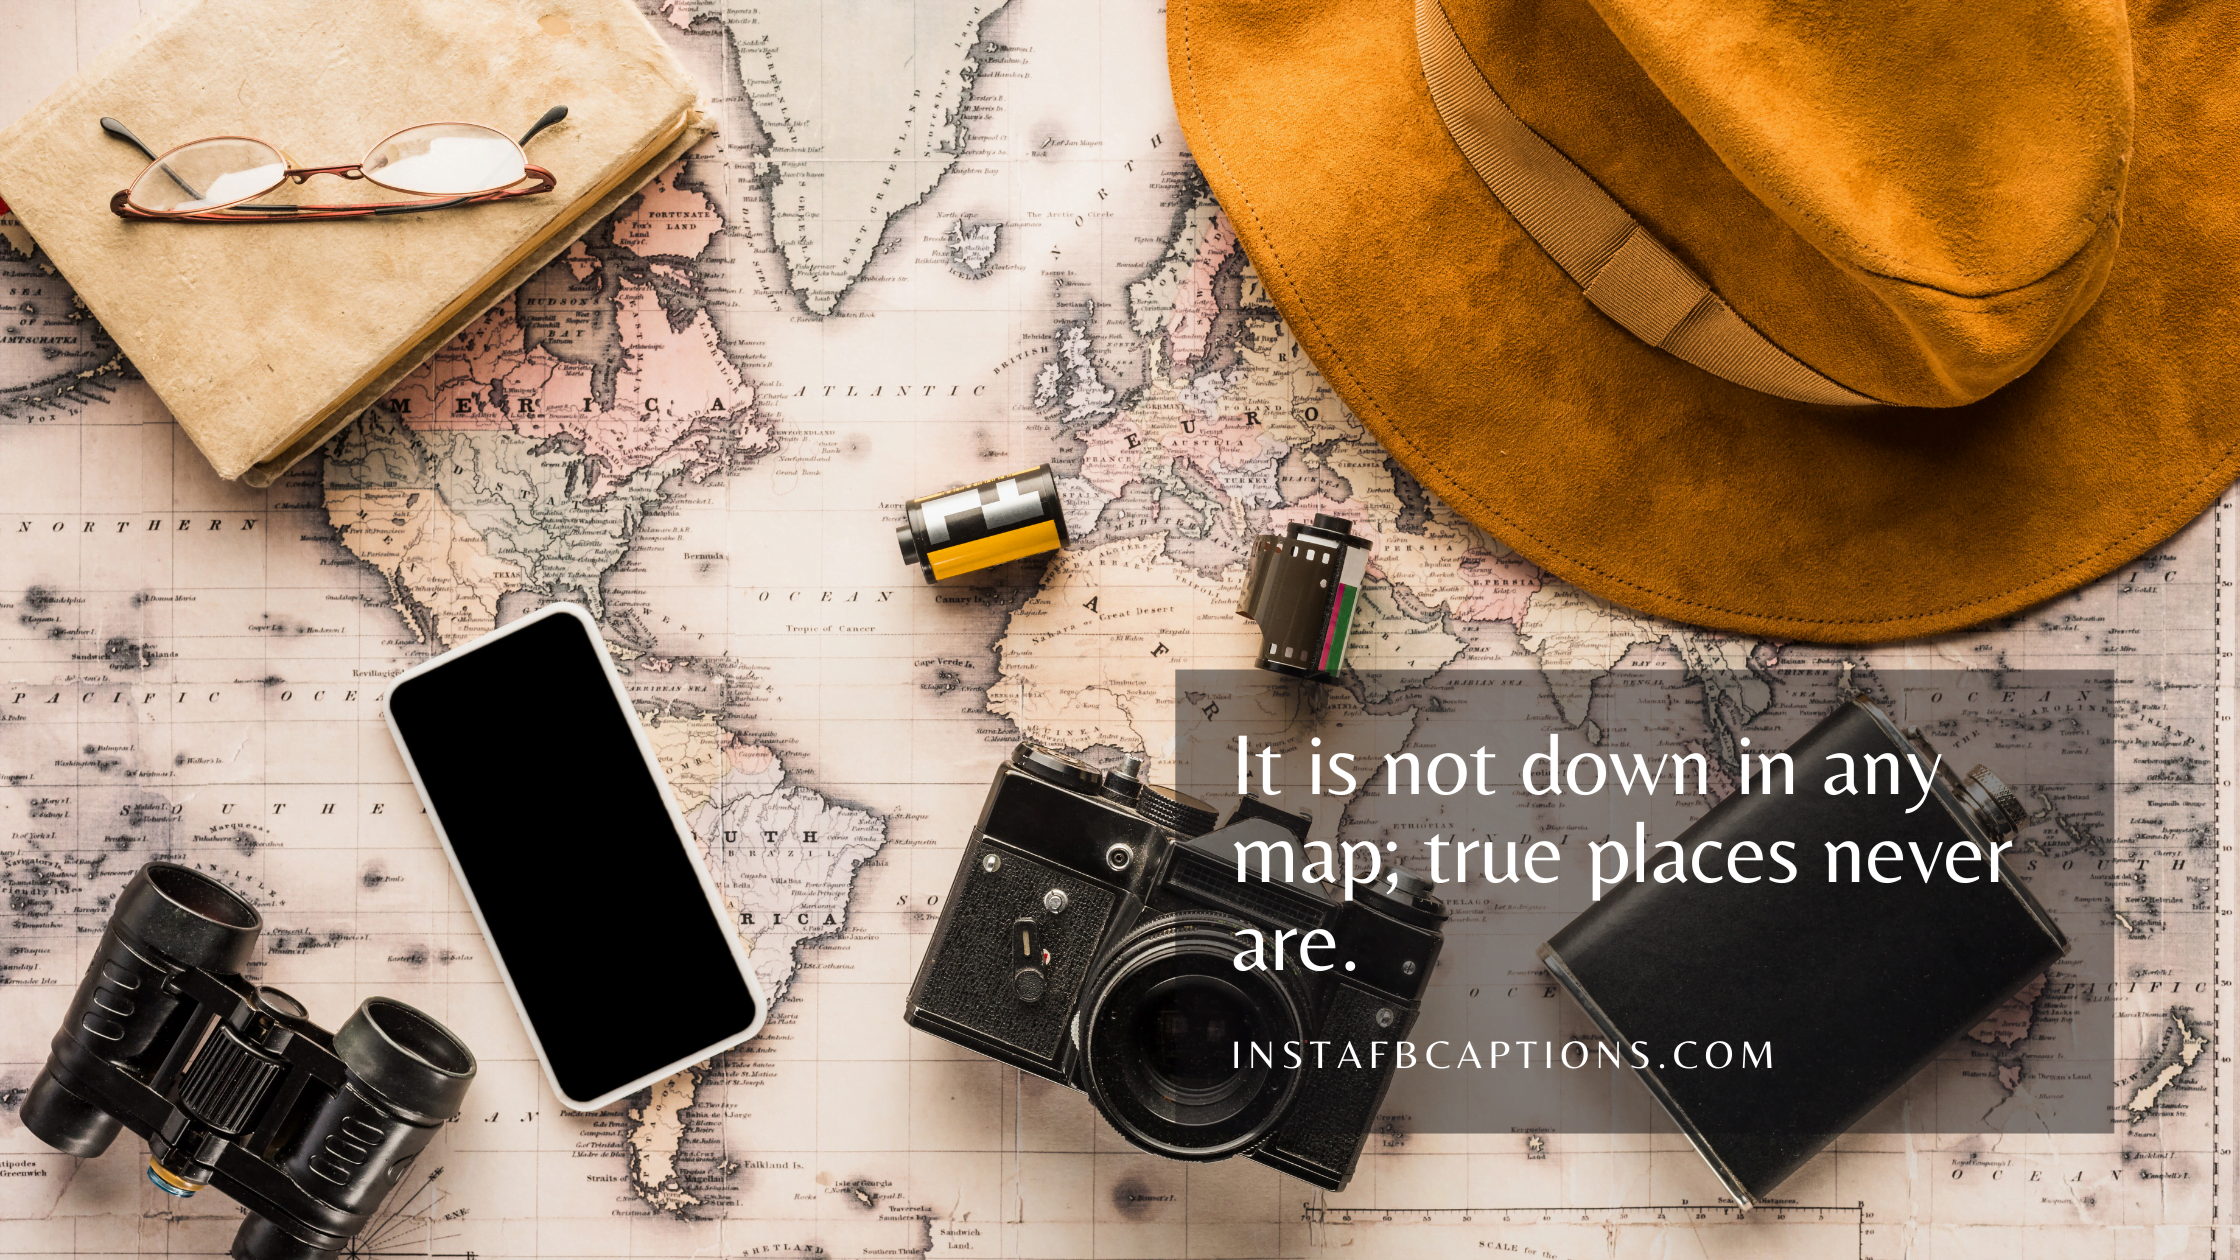 It is not down on any map; true places never are  - Awesome Travel Captions - [New] Travel Captions For Travelling Instagram Reels in 2023